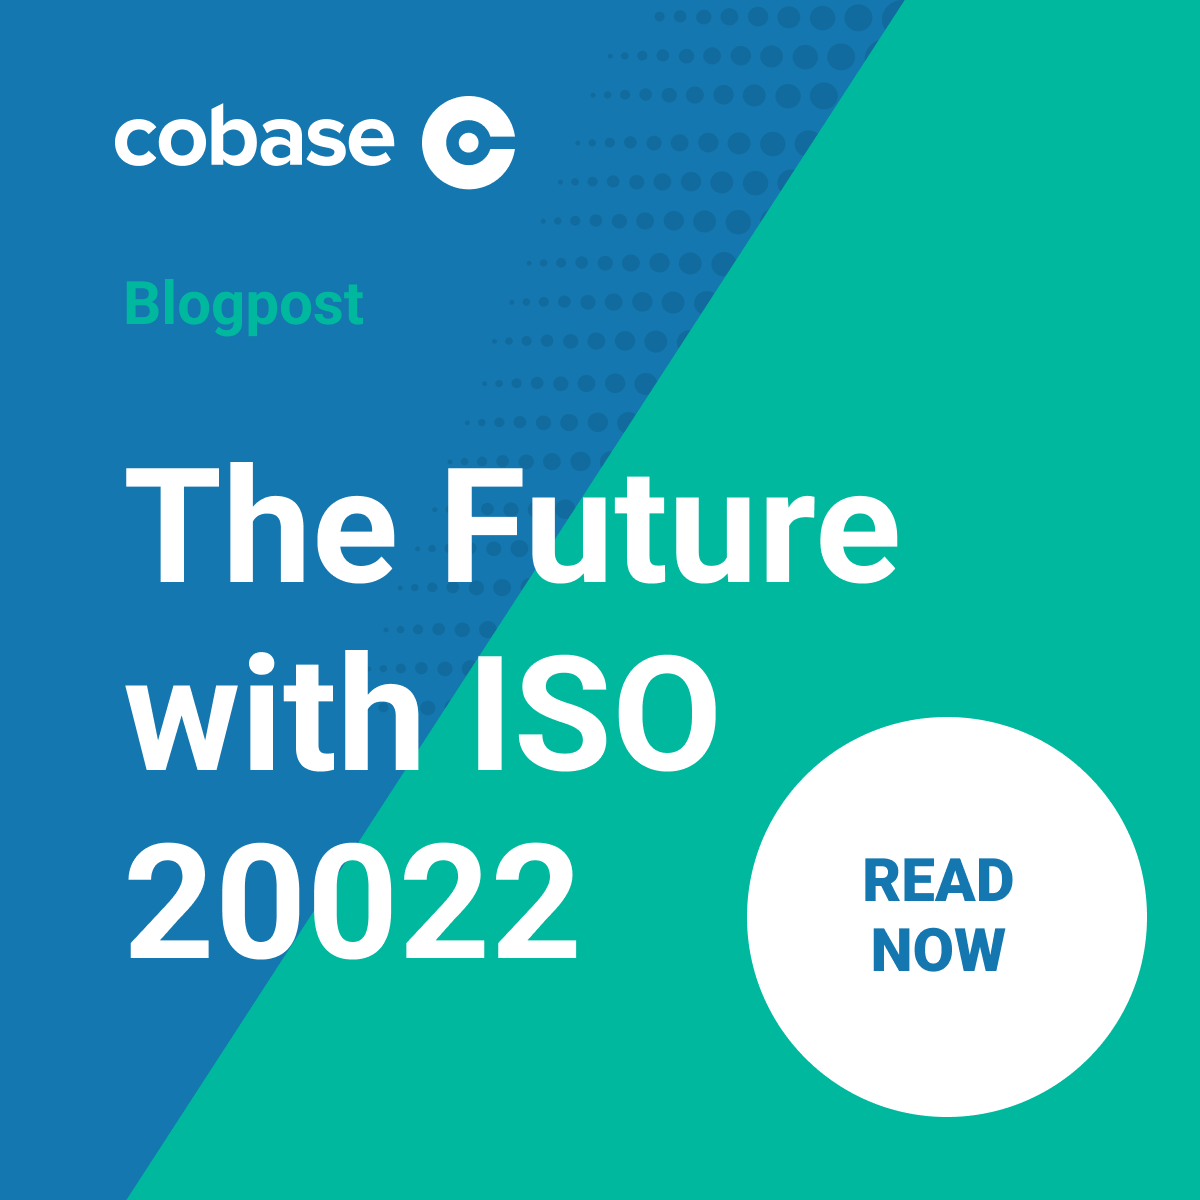 The Future with ISO 20022: A New Payment Ecosystems